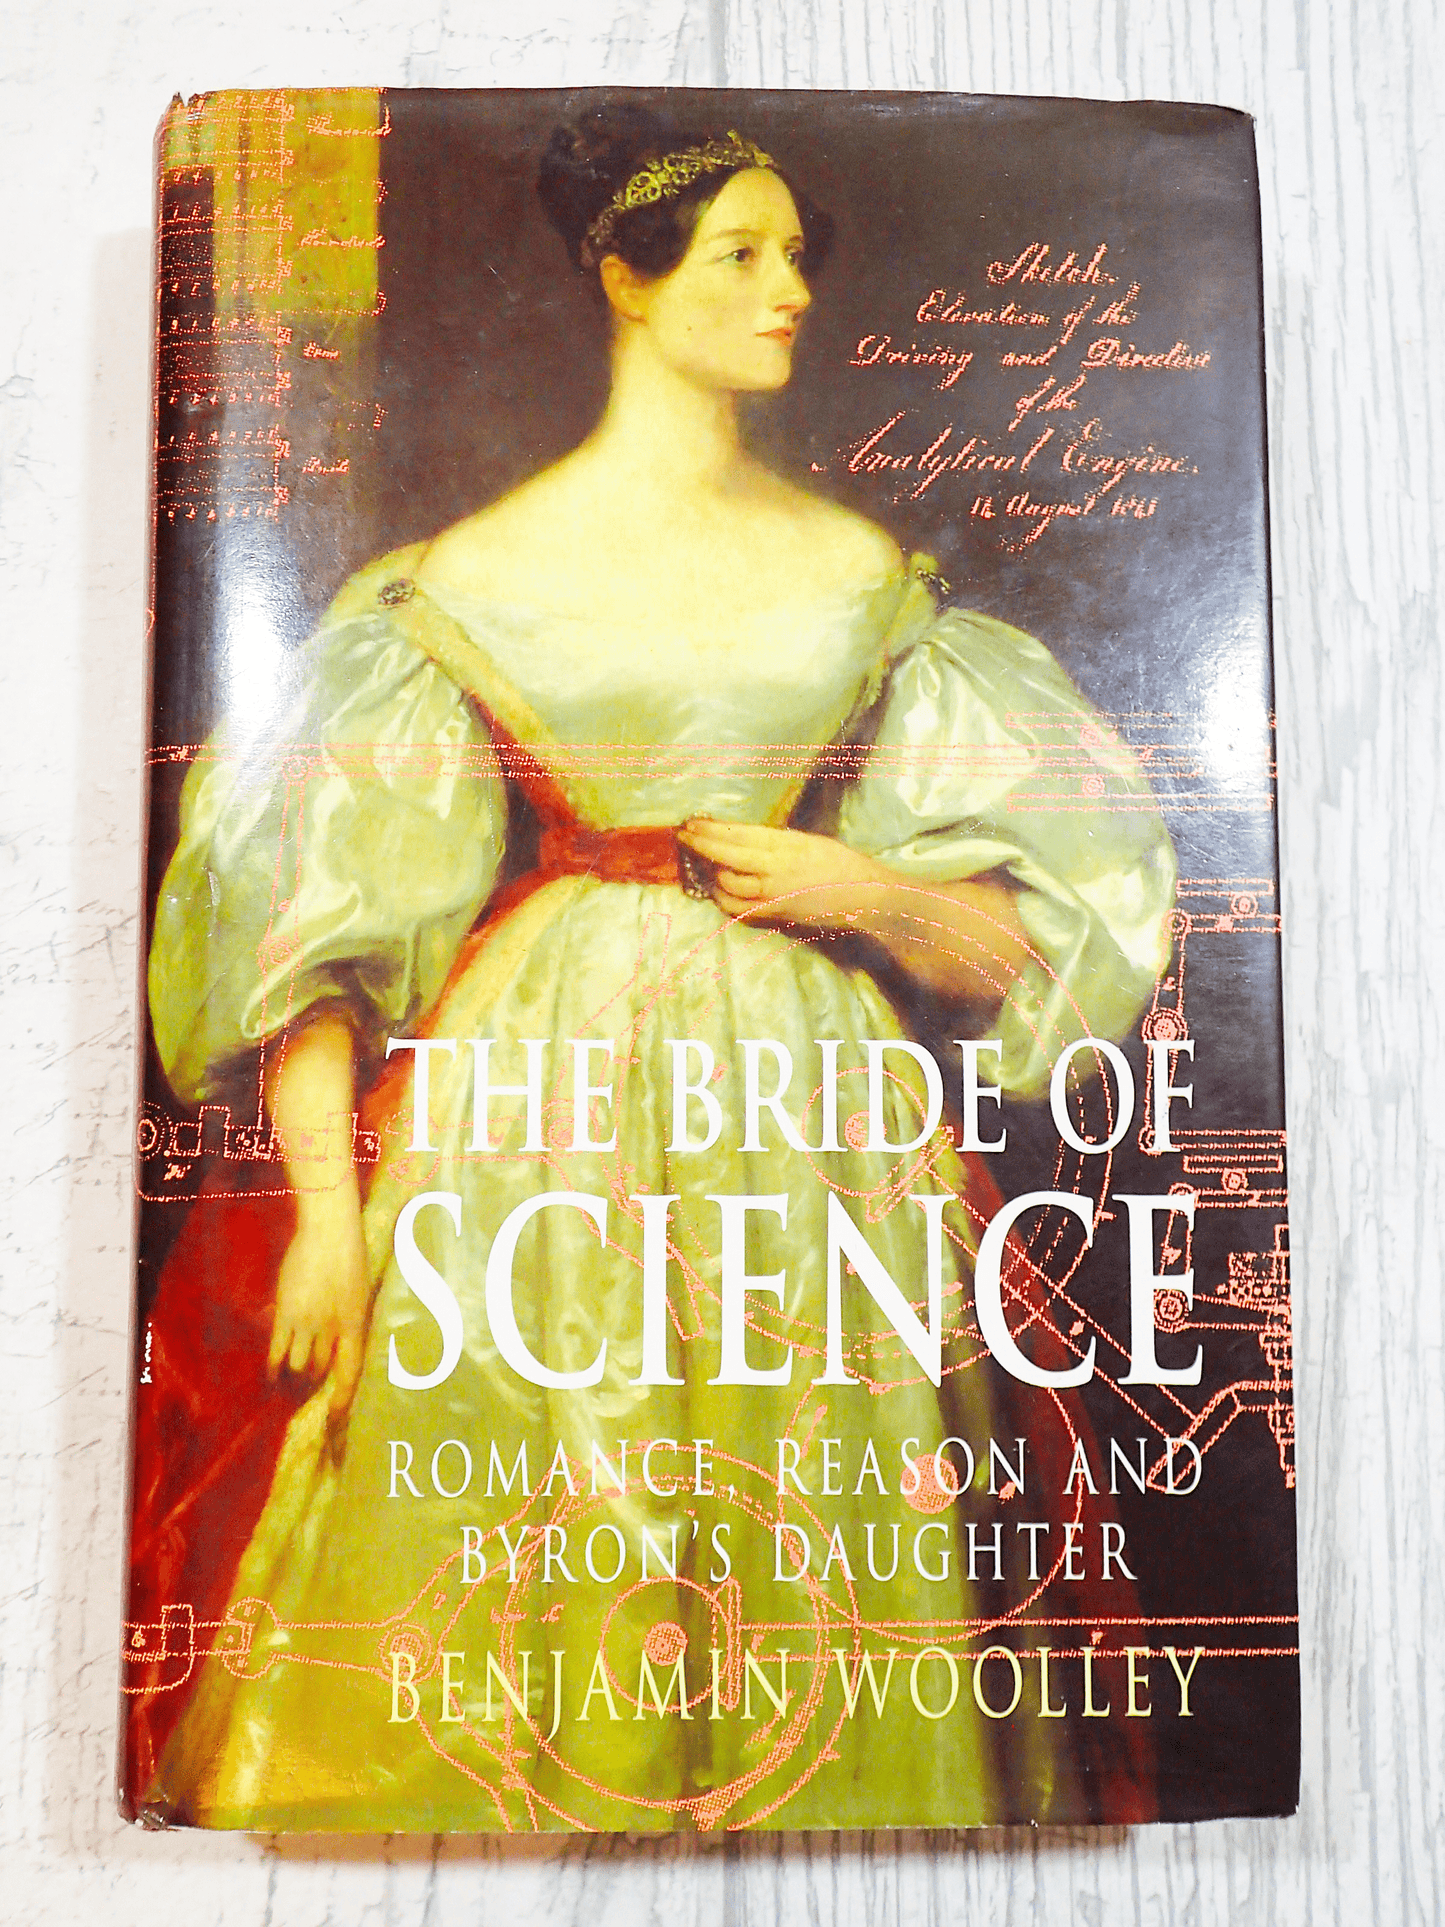 Front cover of The Bride of Science Benjamin Woolley Ada Lovelace Byron Biography Vintage Book 1999 showing portrait of Ada and white titles against a light background